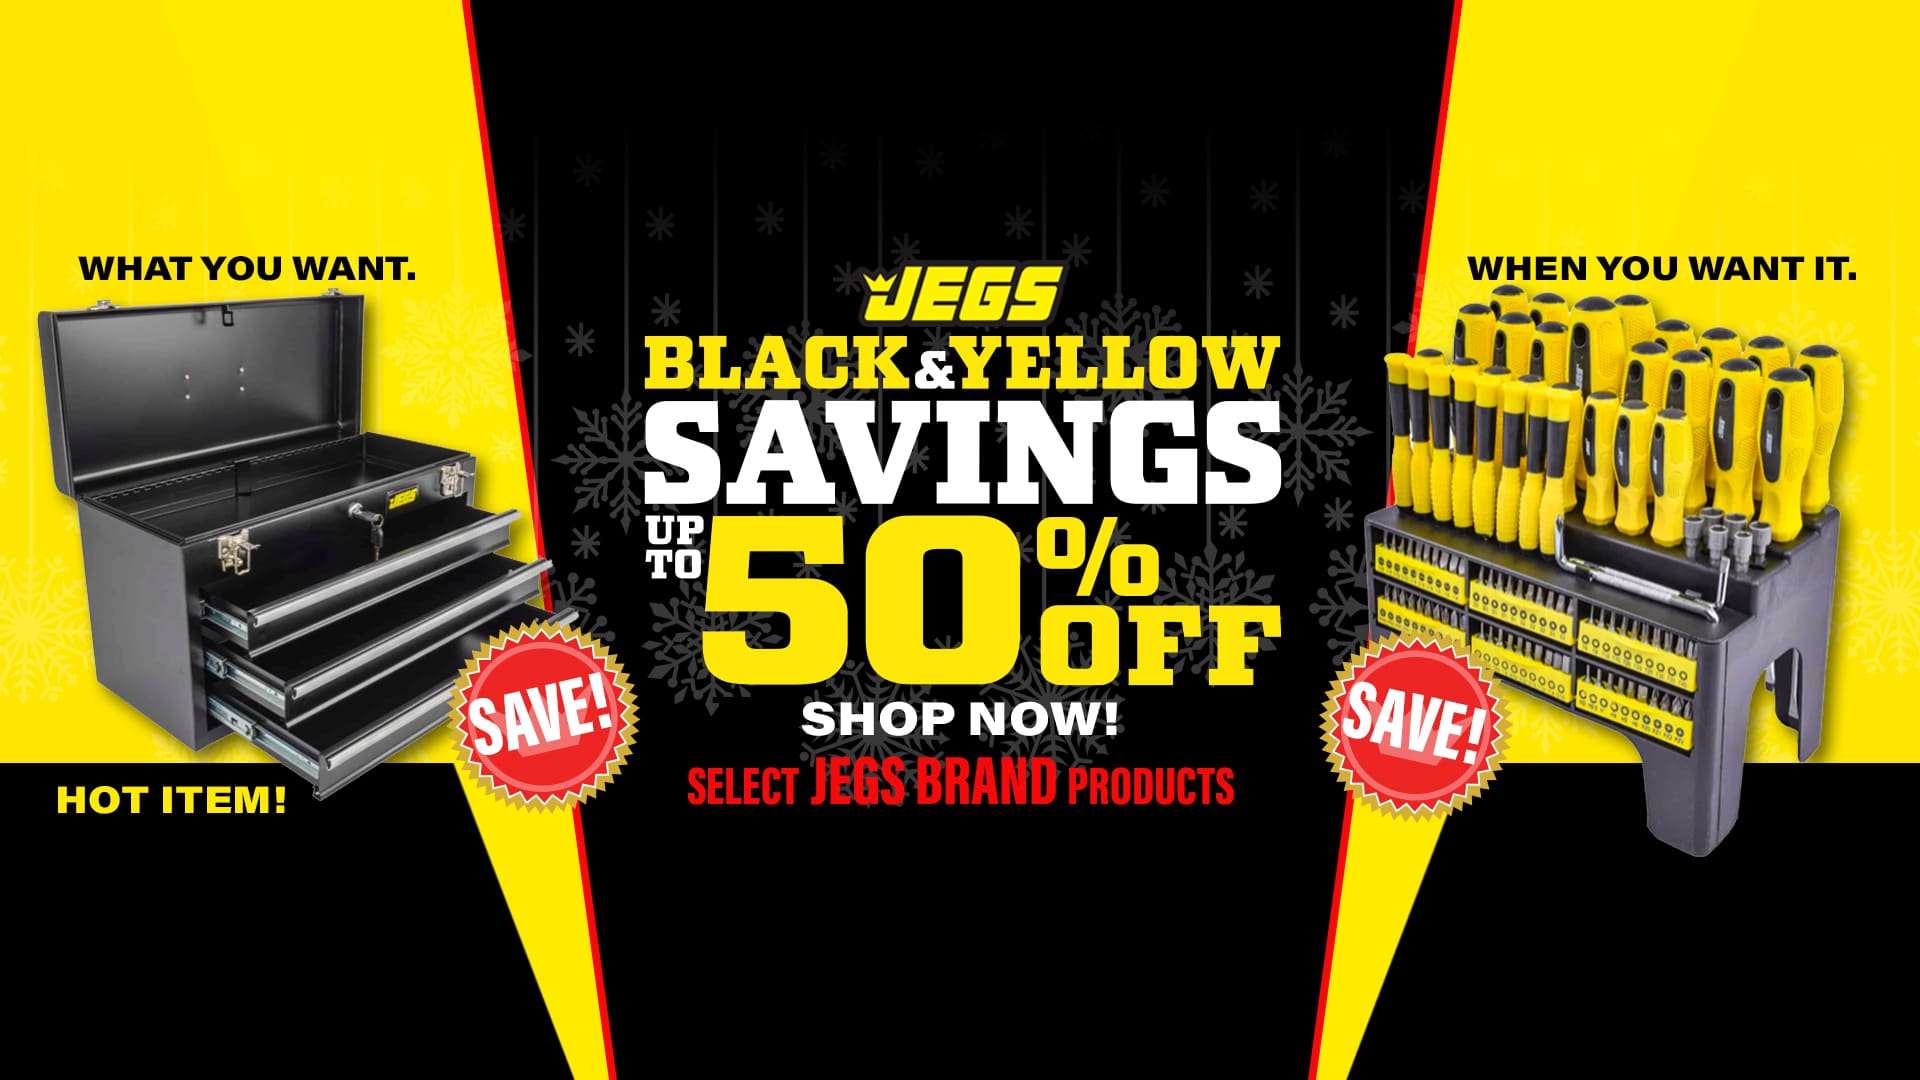 JEGS Black and Yellow Savings Up To 50% Off